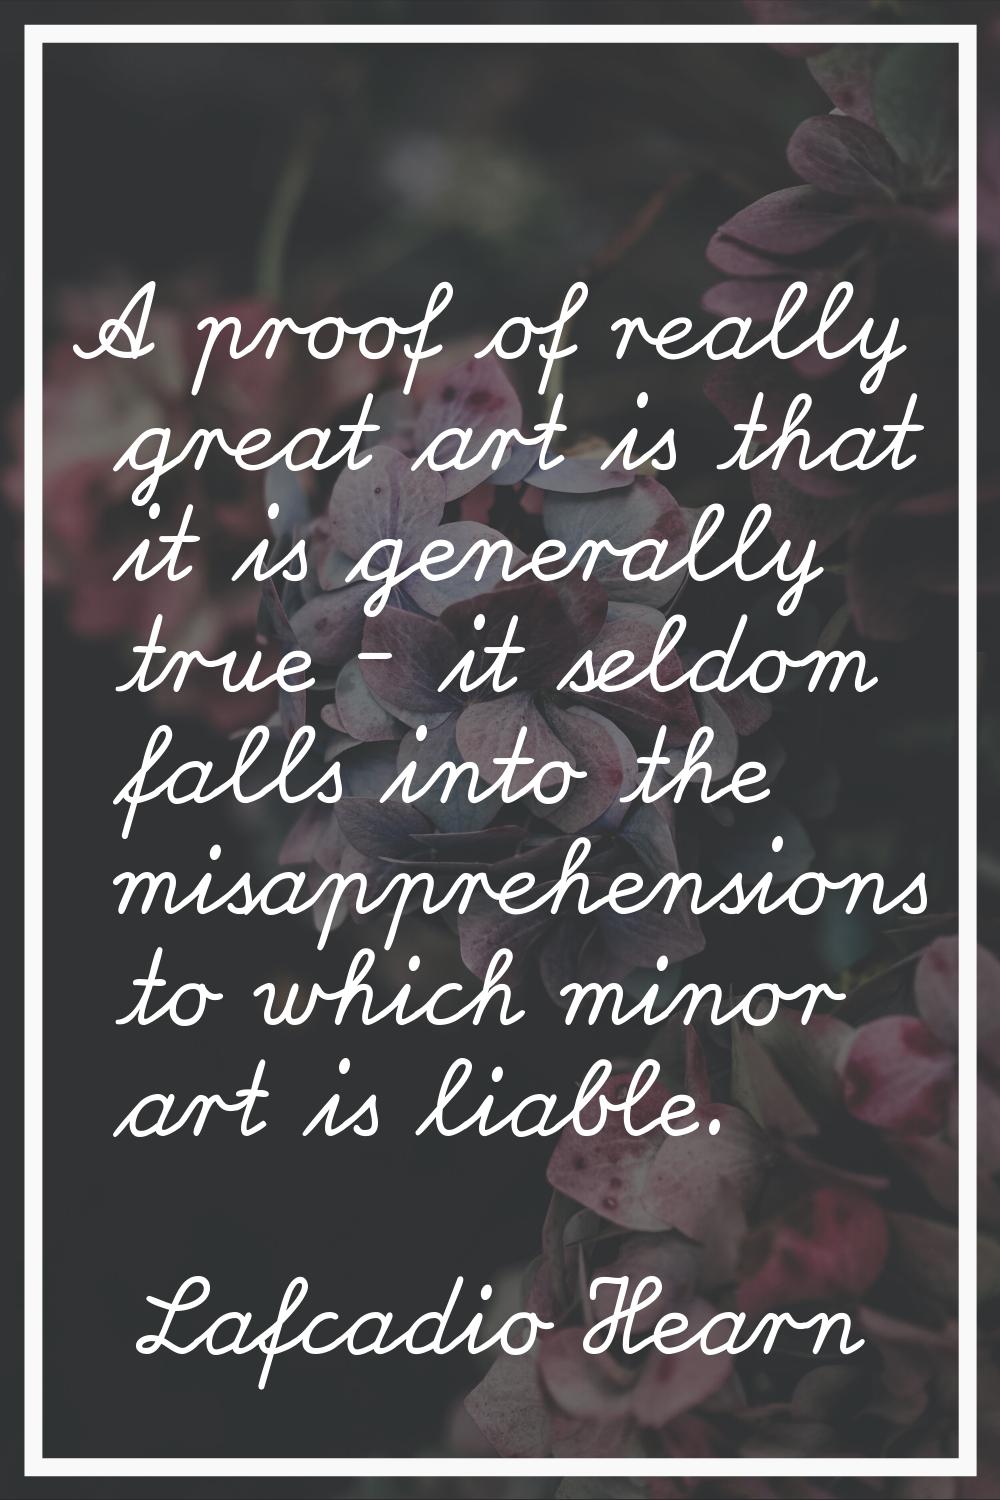 A proof of really great art is that it is generally true - it seldom falls into the misapprehension